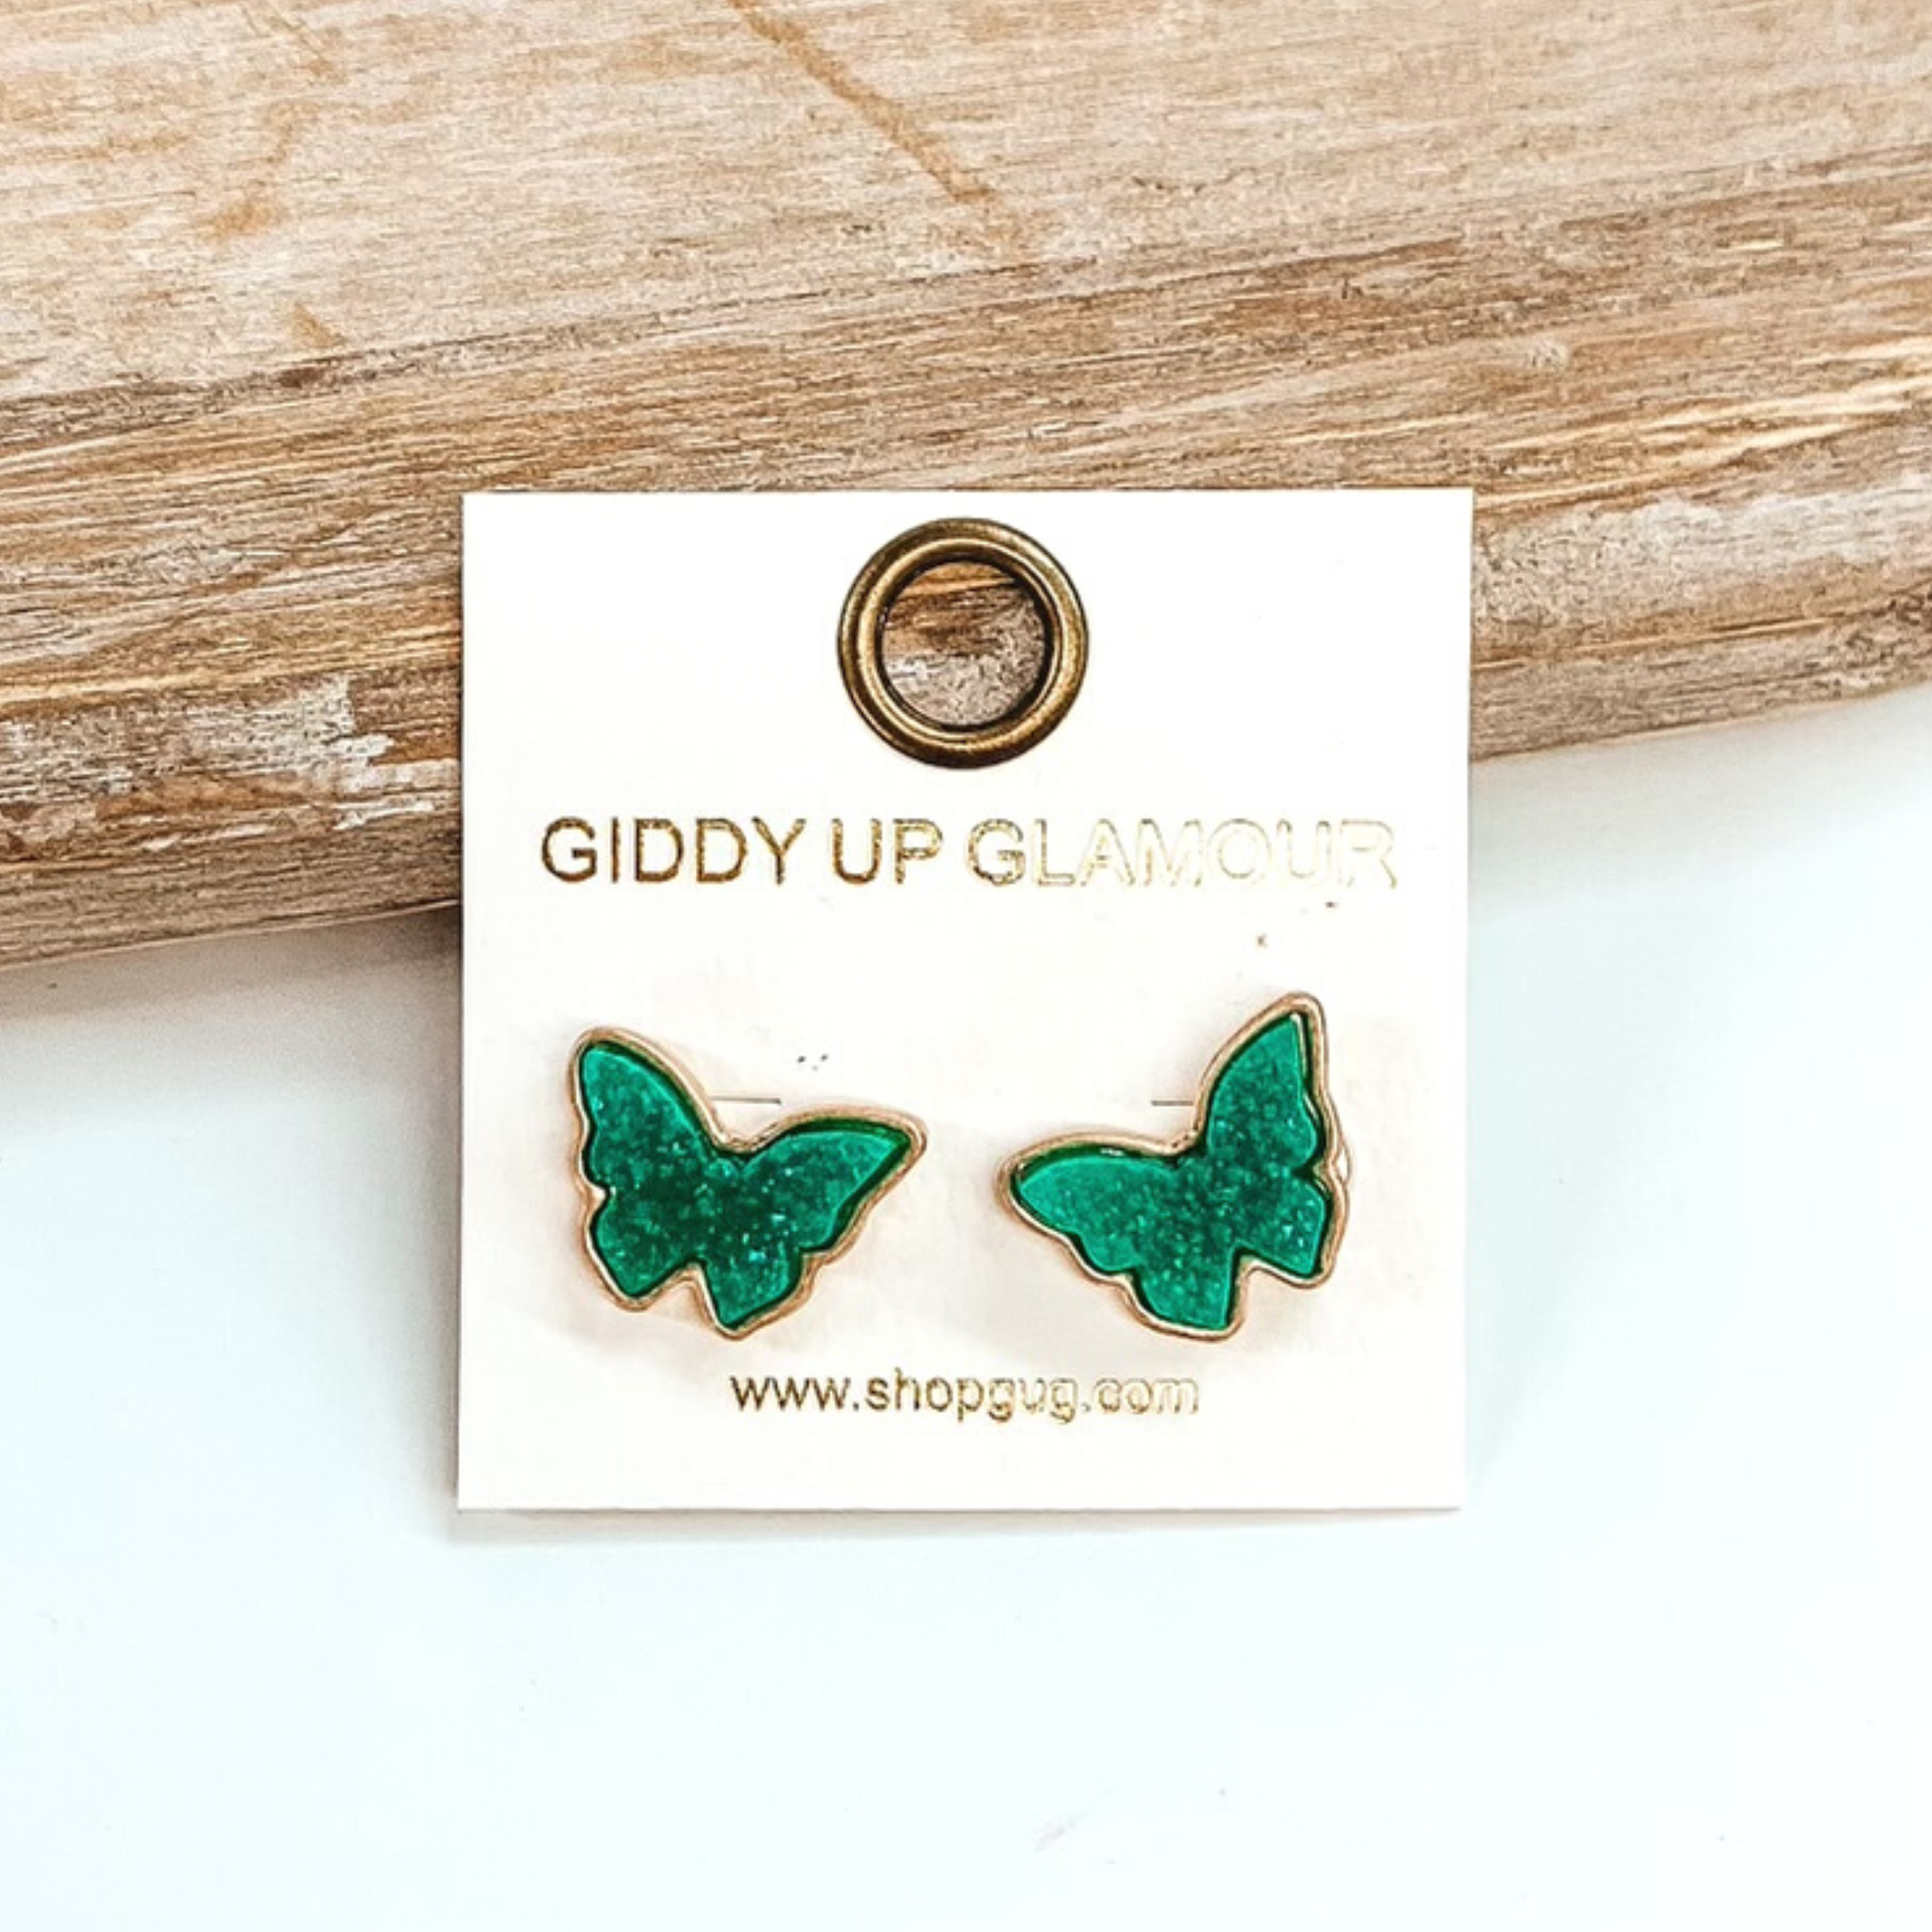 Gold post back earrings with druzy, turquoise, butterfly shaped stone. These earrings are pictured on a white earrings holder on a white background, leaning against a tan block.